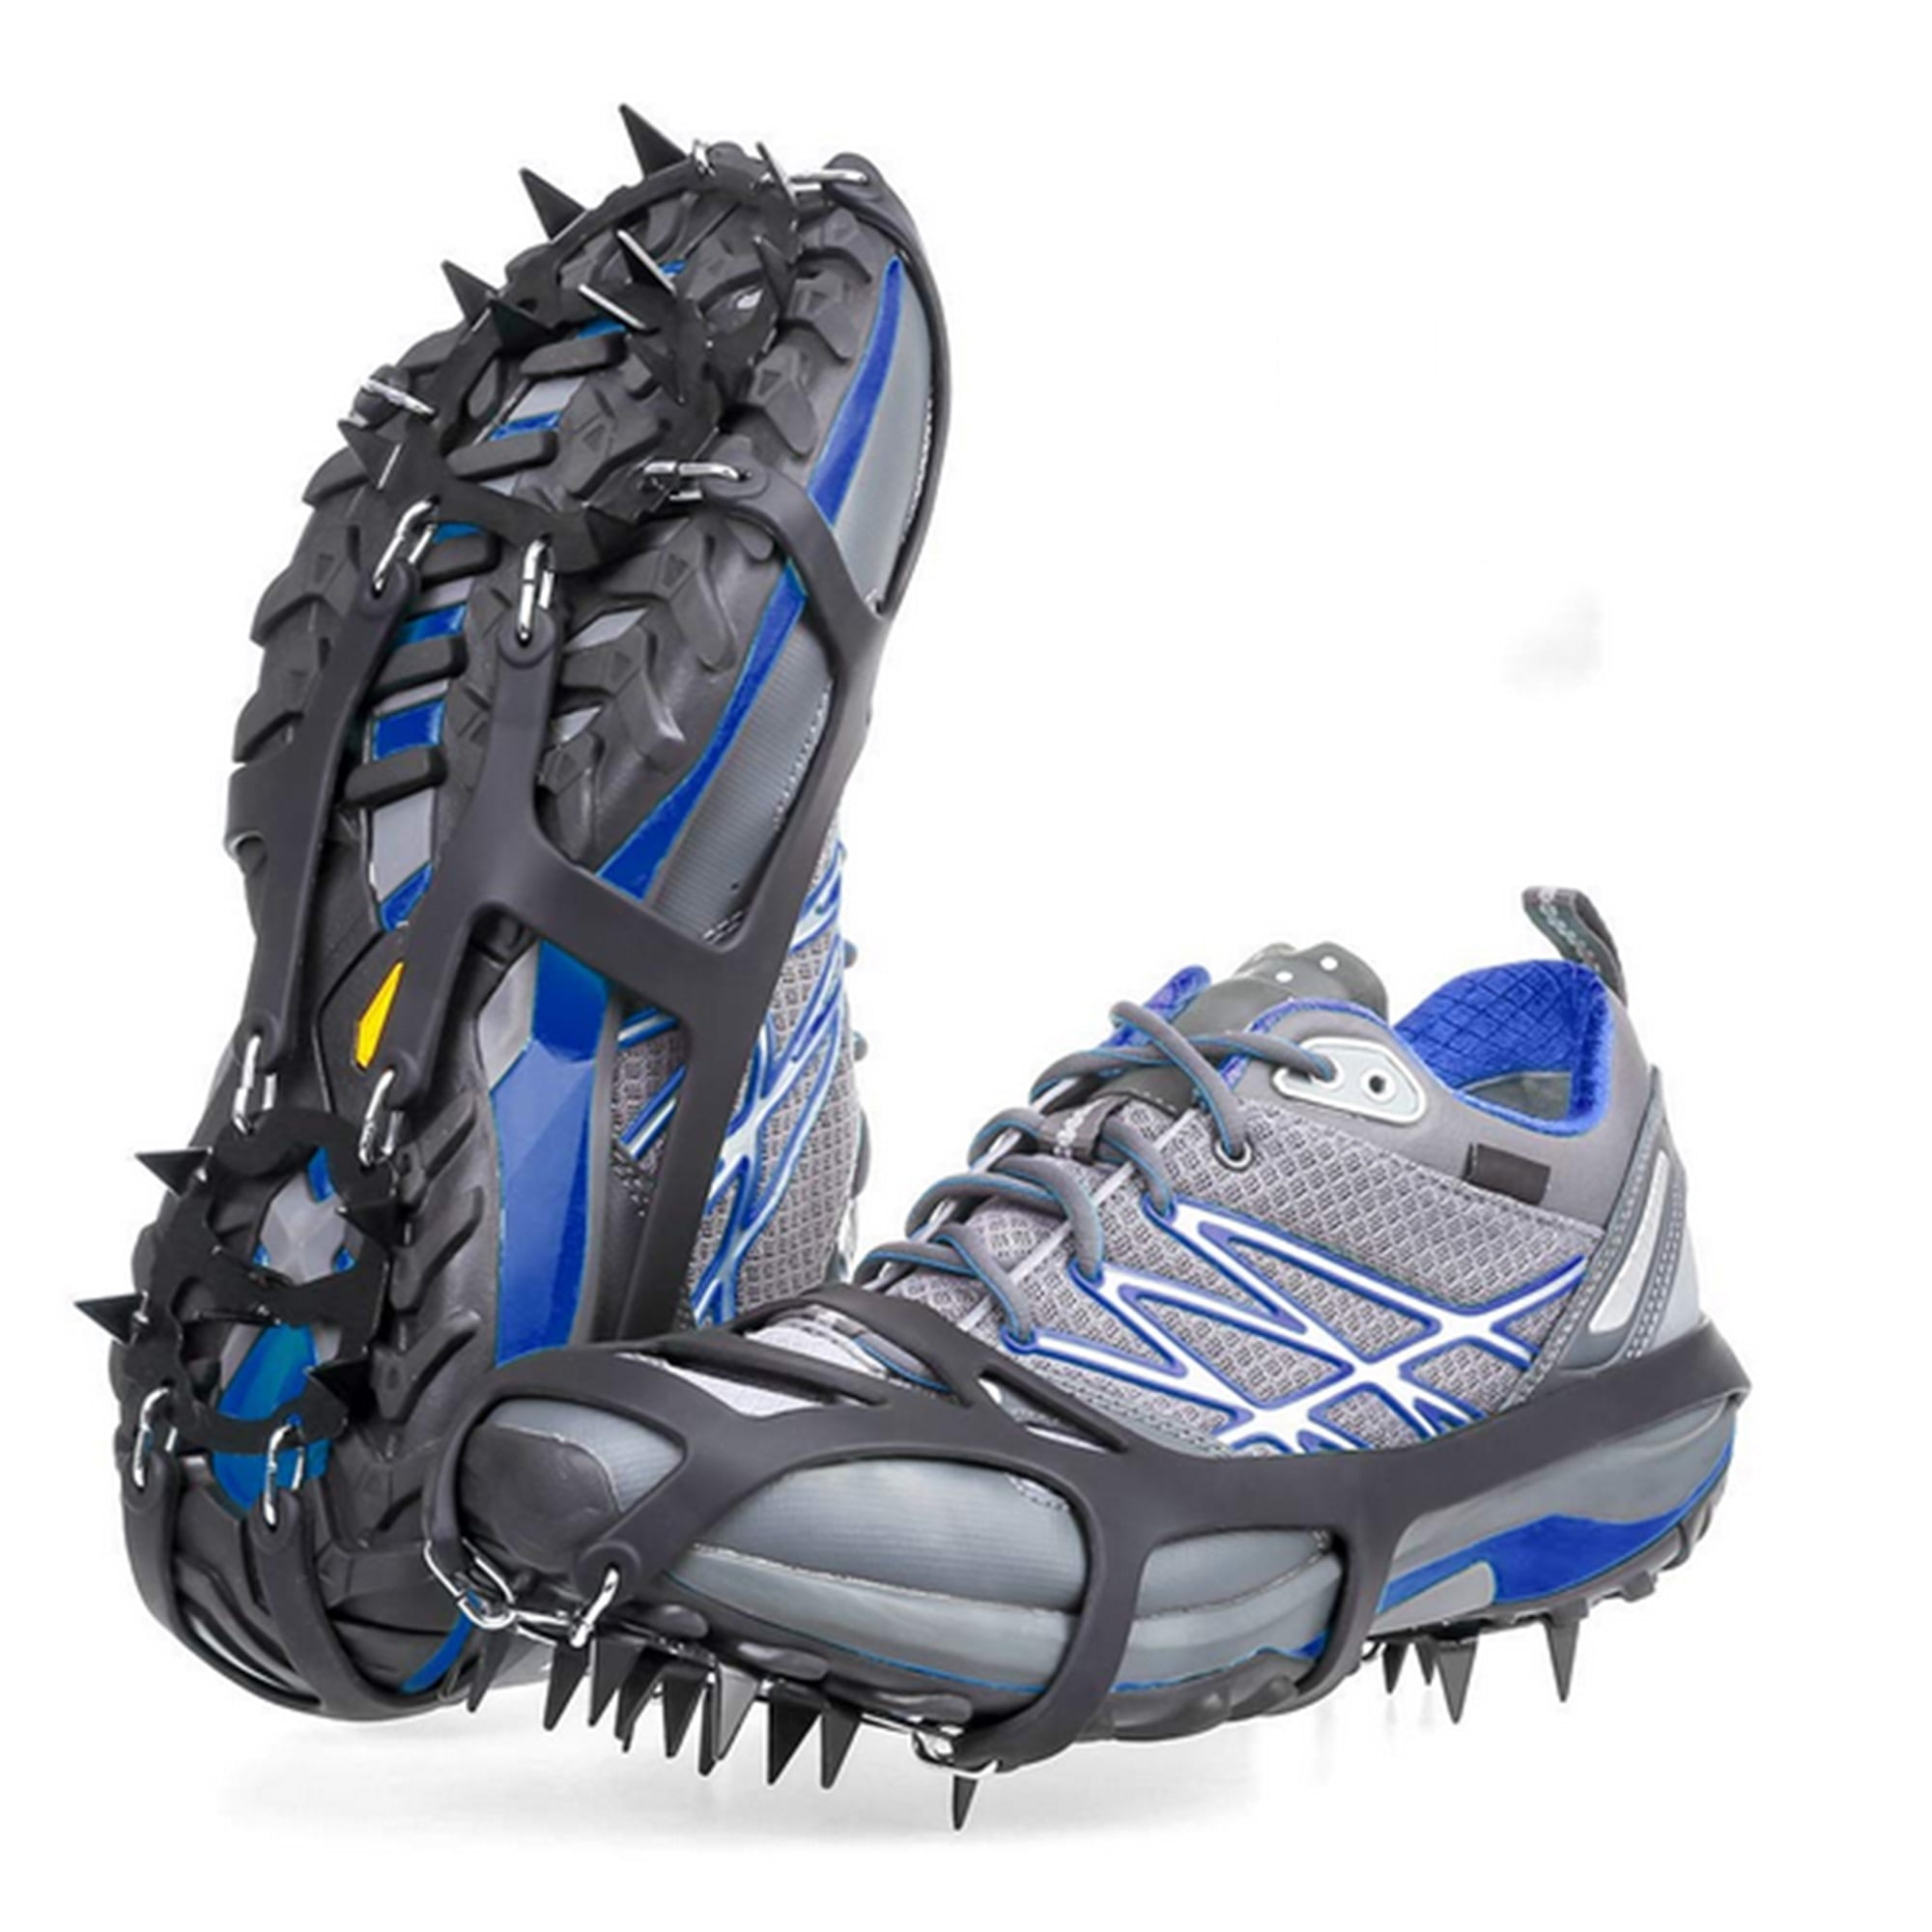 Anti-Slip Shoe Spike Cleats Crampons Spikes Shoes Boots Grips Snow Hiking 